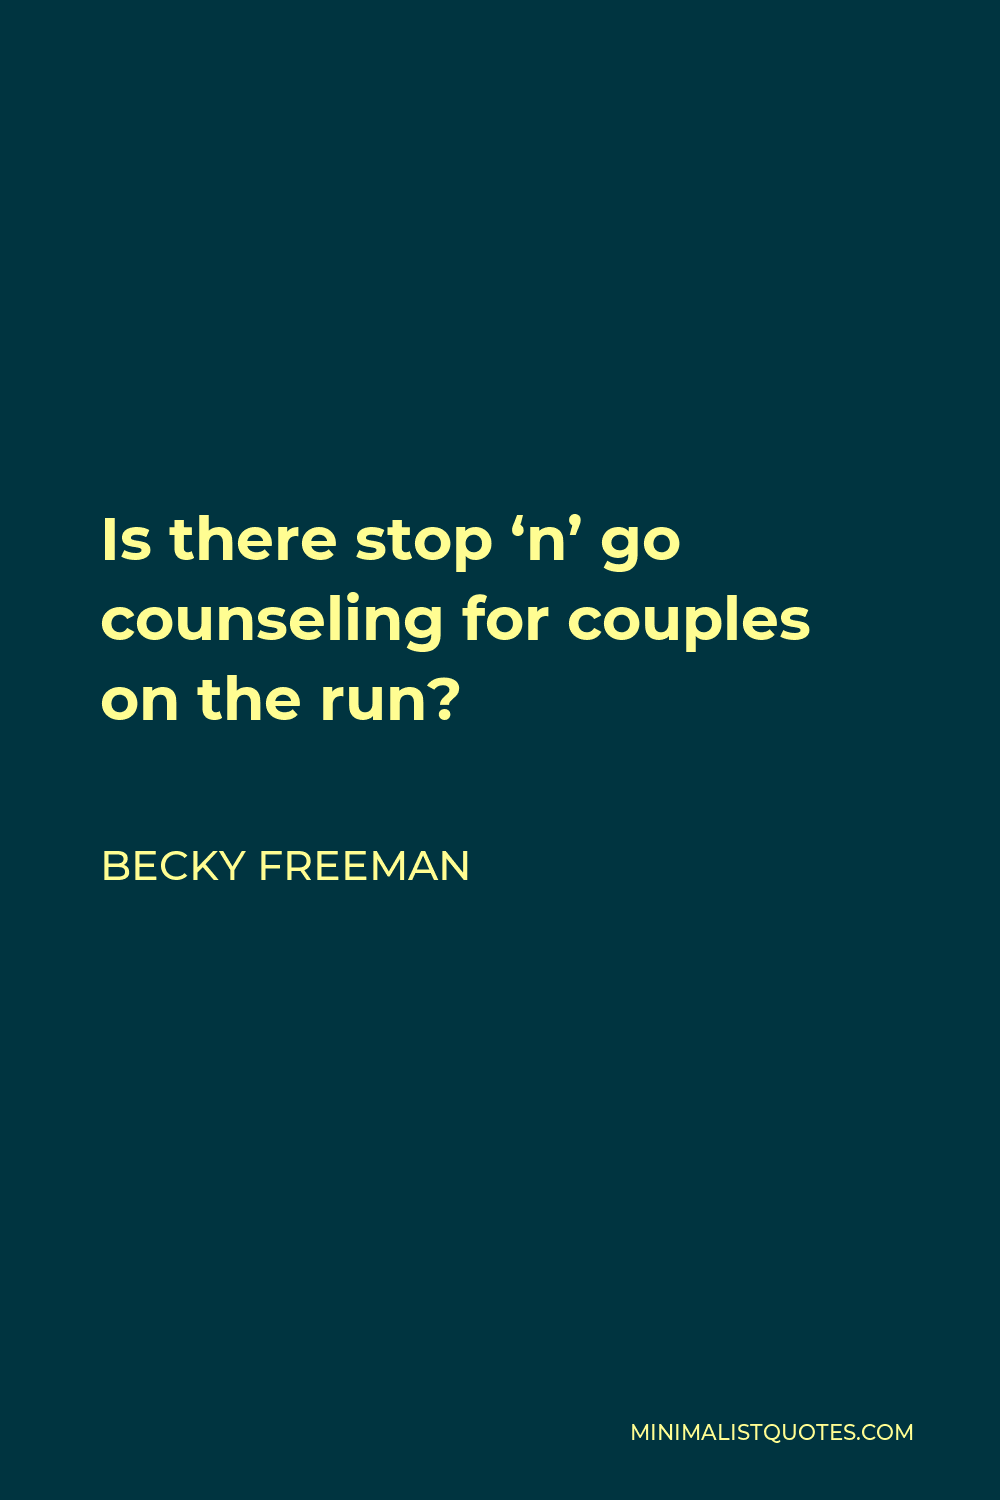 Becky Freeman Quote - Is there stop ‘n’ go counseling for couples on the run?